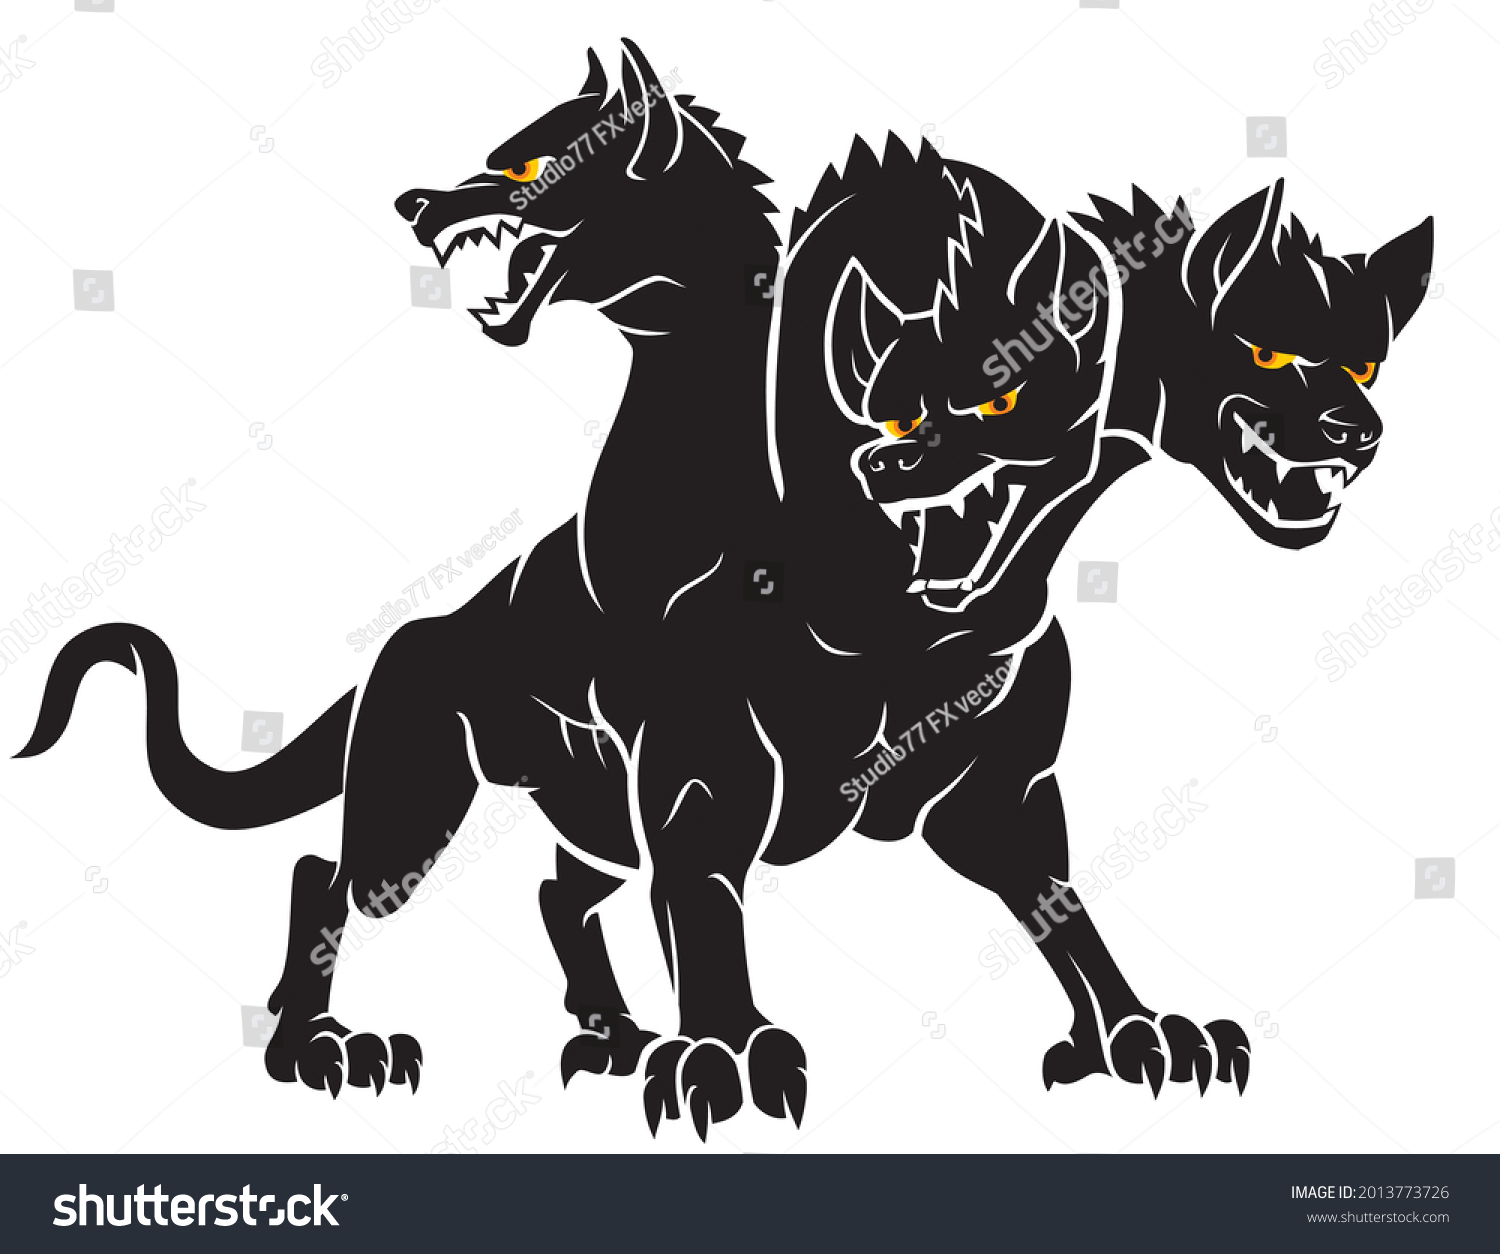 SVG of Cerberus, Greek Mythical Creature of the Underworld svg